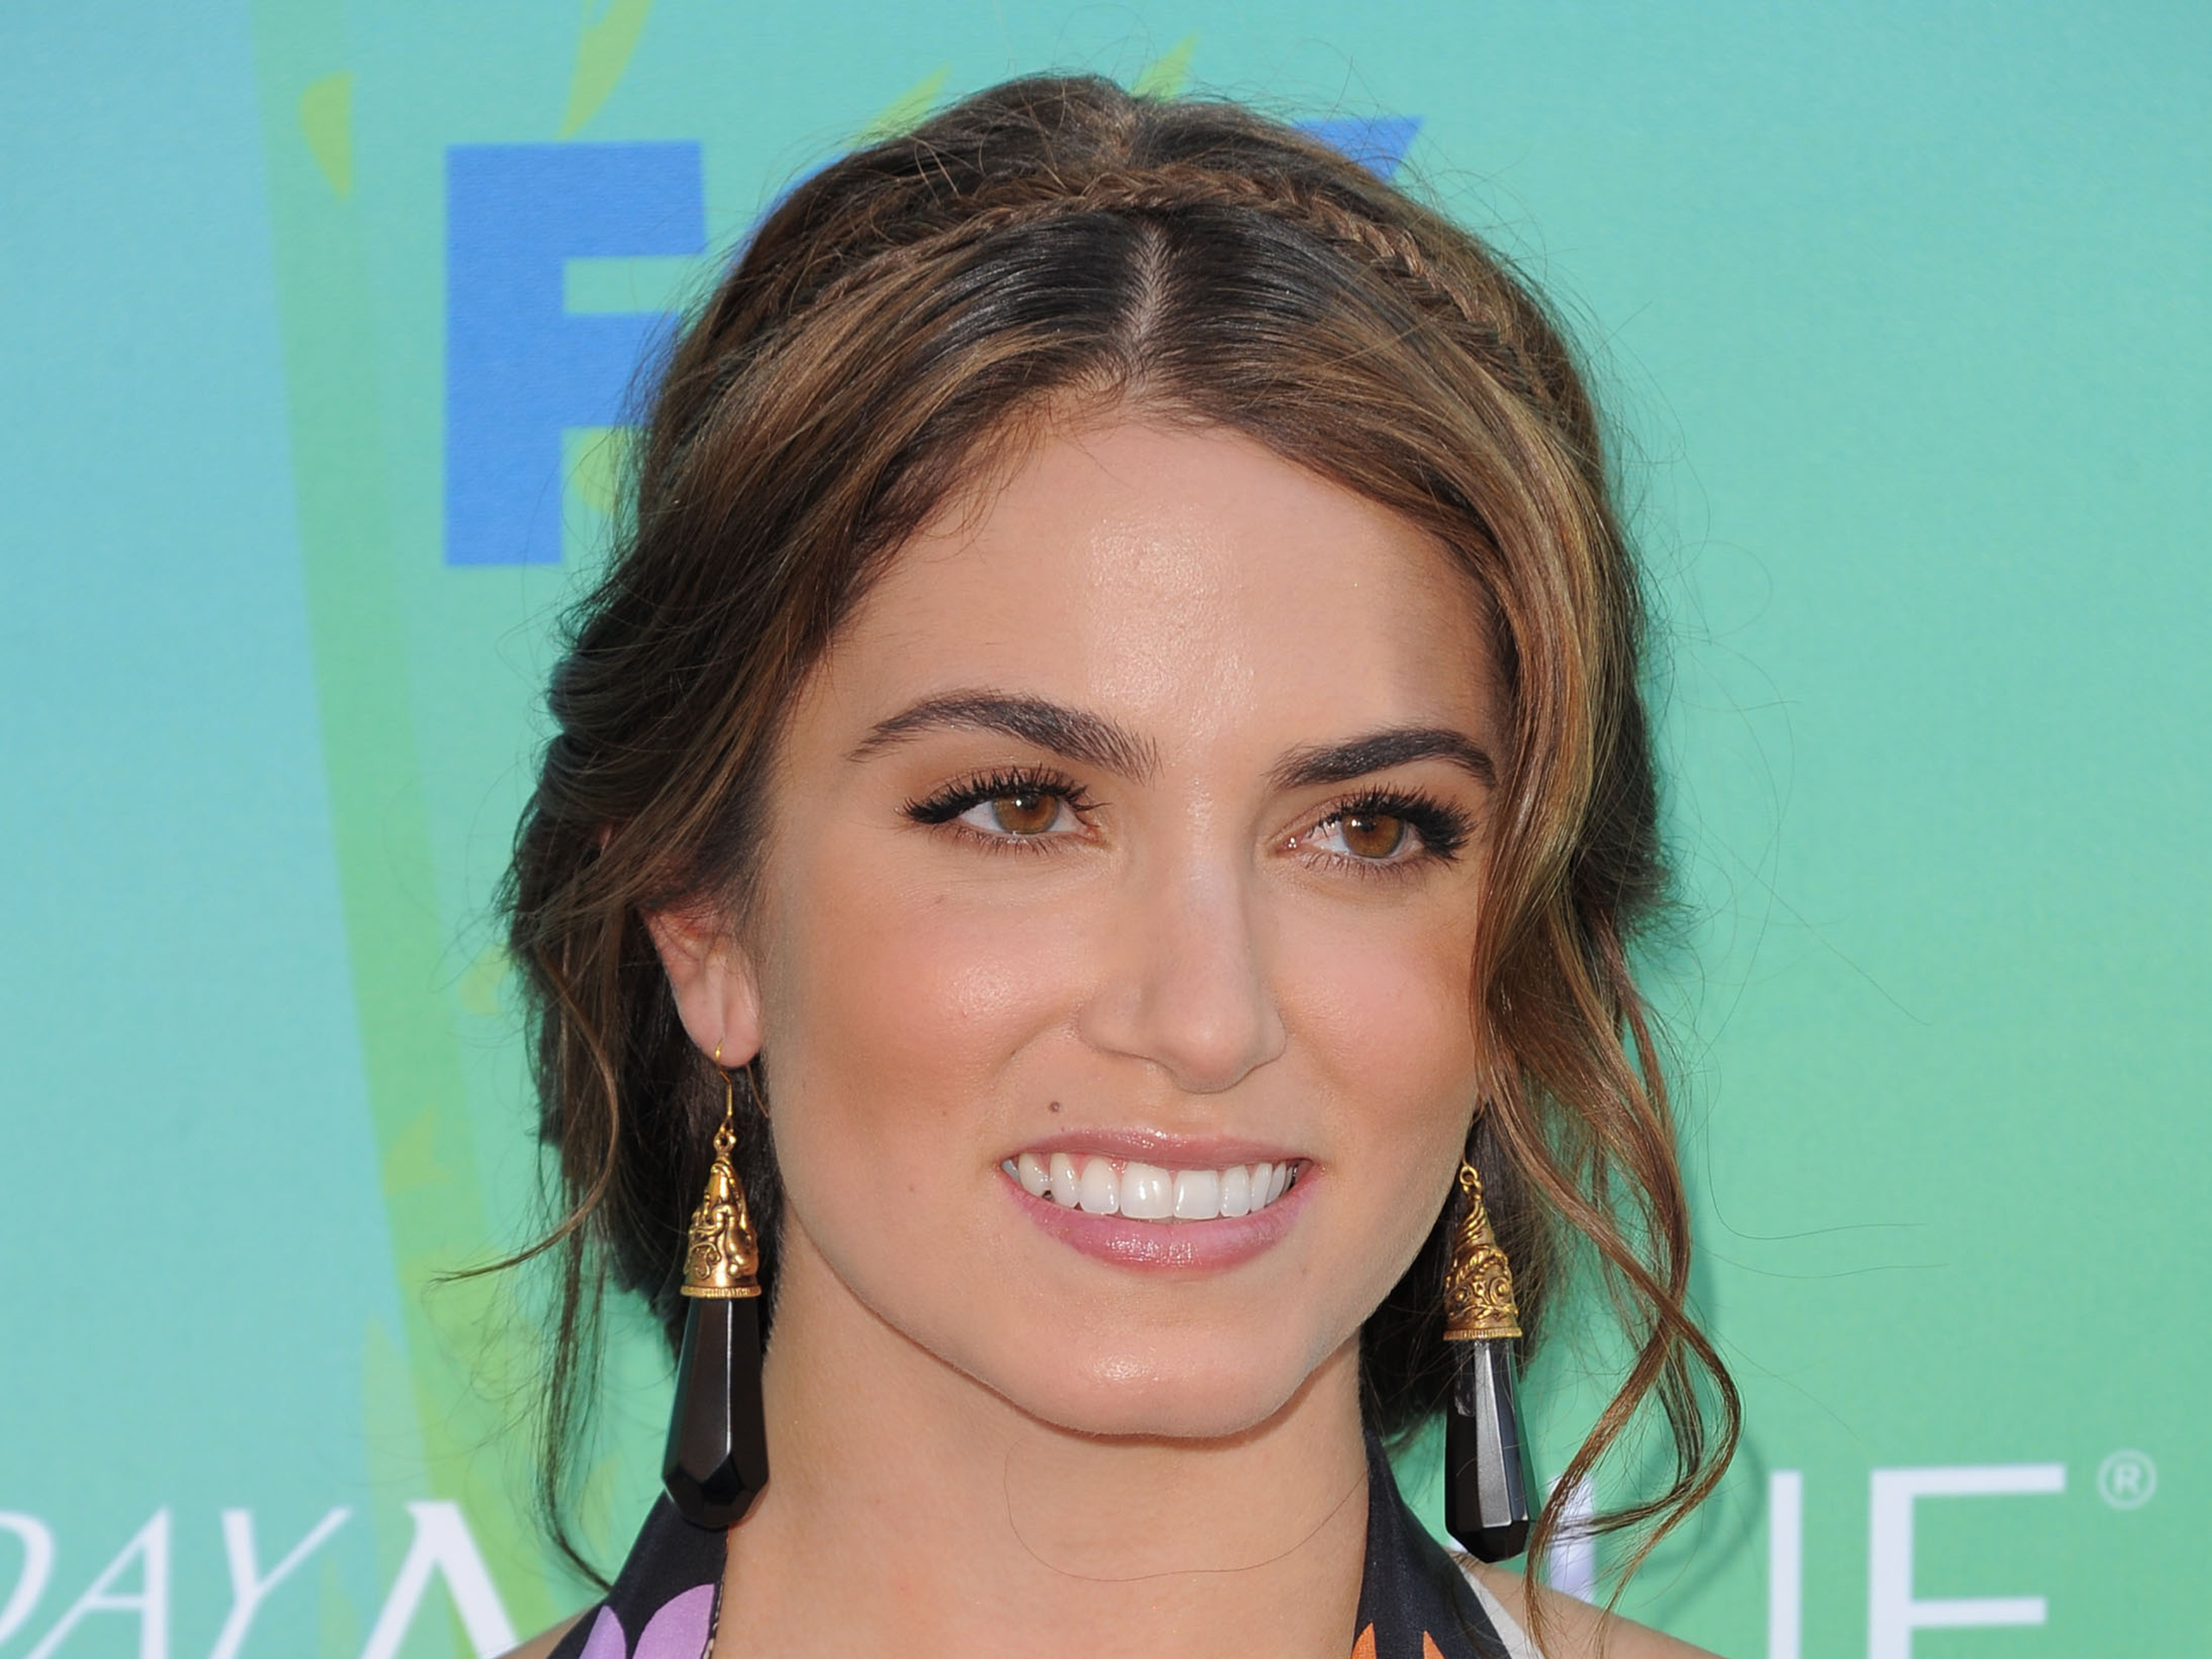 Nikki Reed HD Wallpapers And Photos download